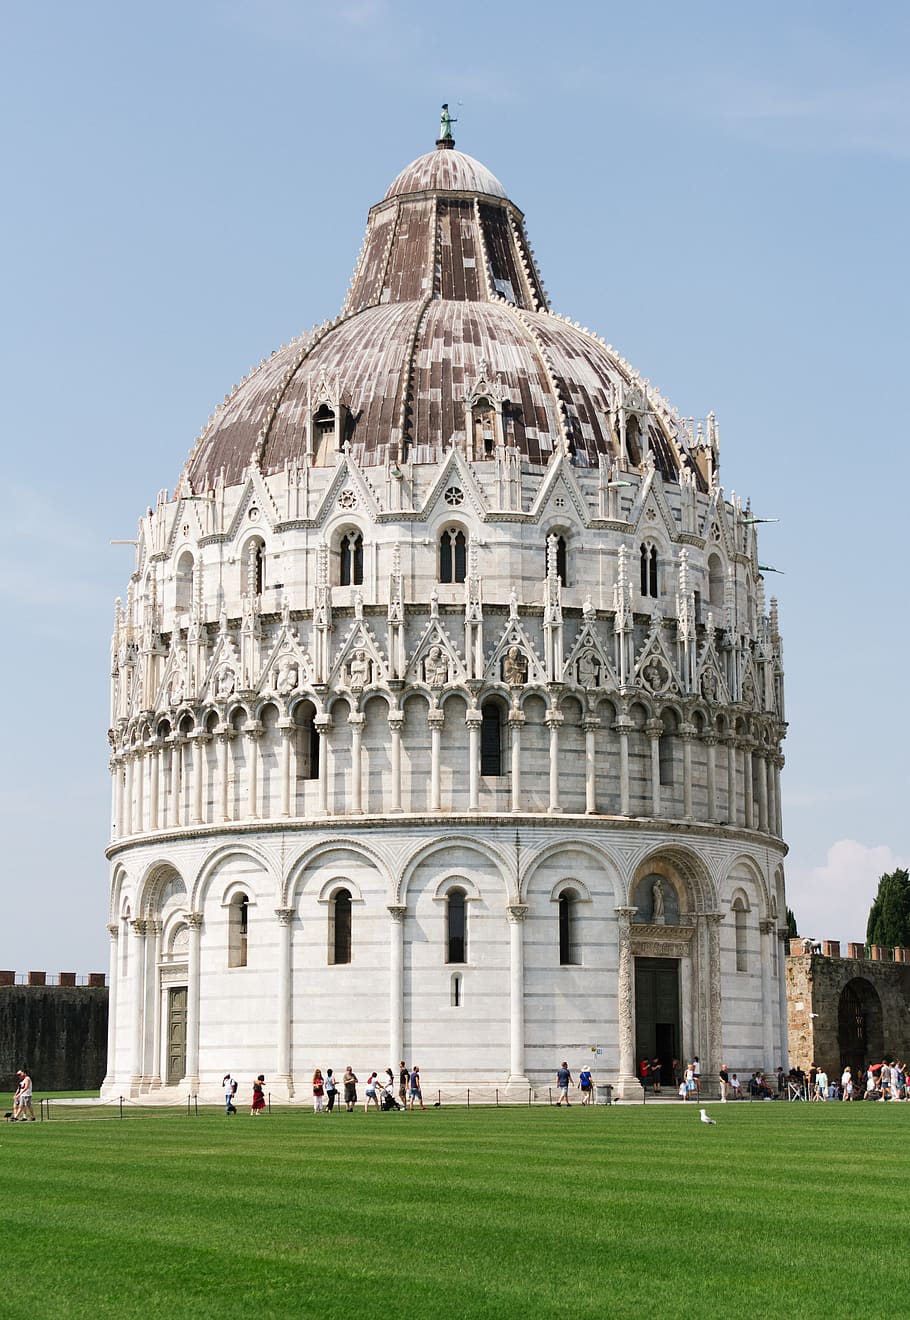 pisa, italy, the leaning tower of pisa, architecture, tower, italian, europe, famous, history, building